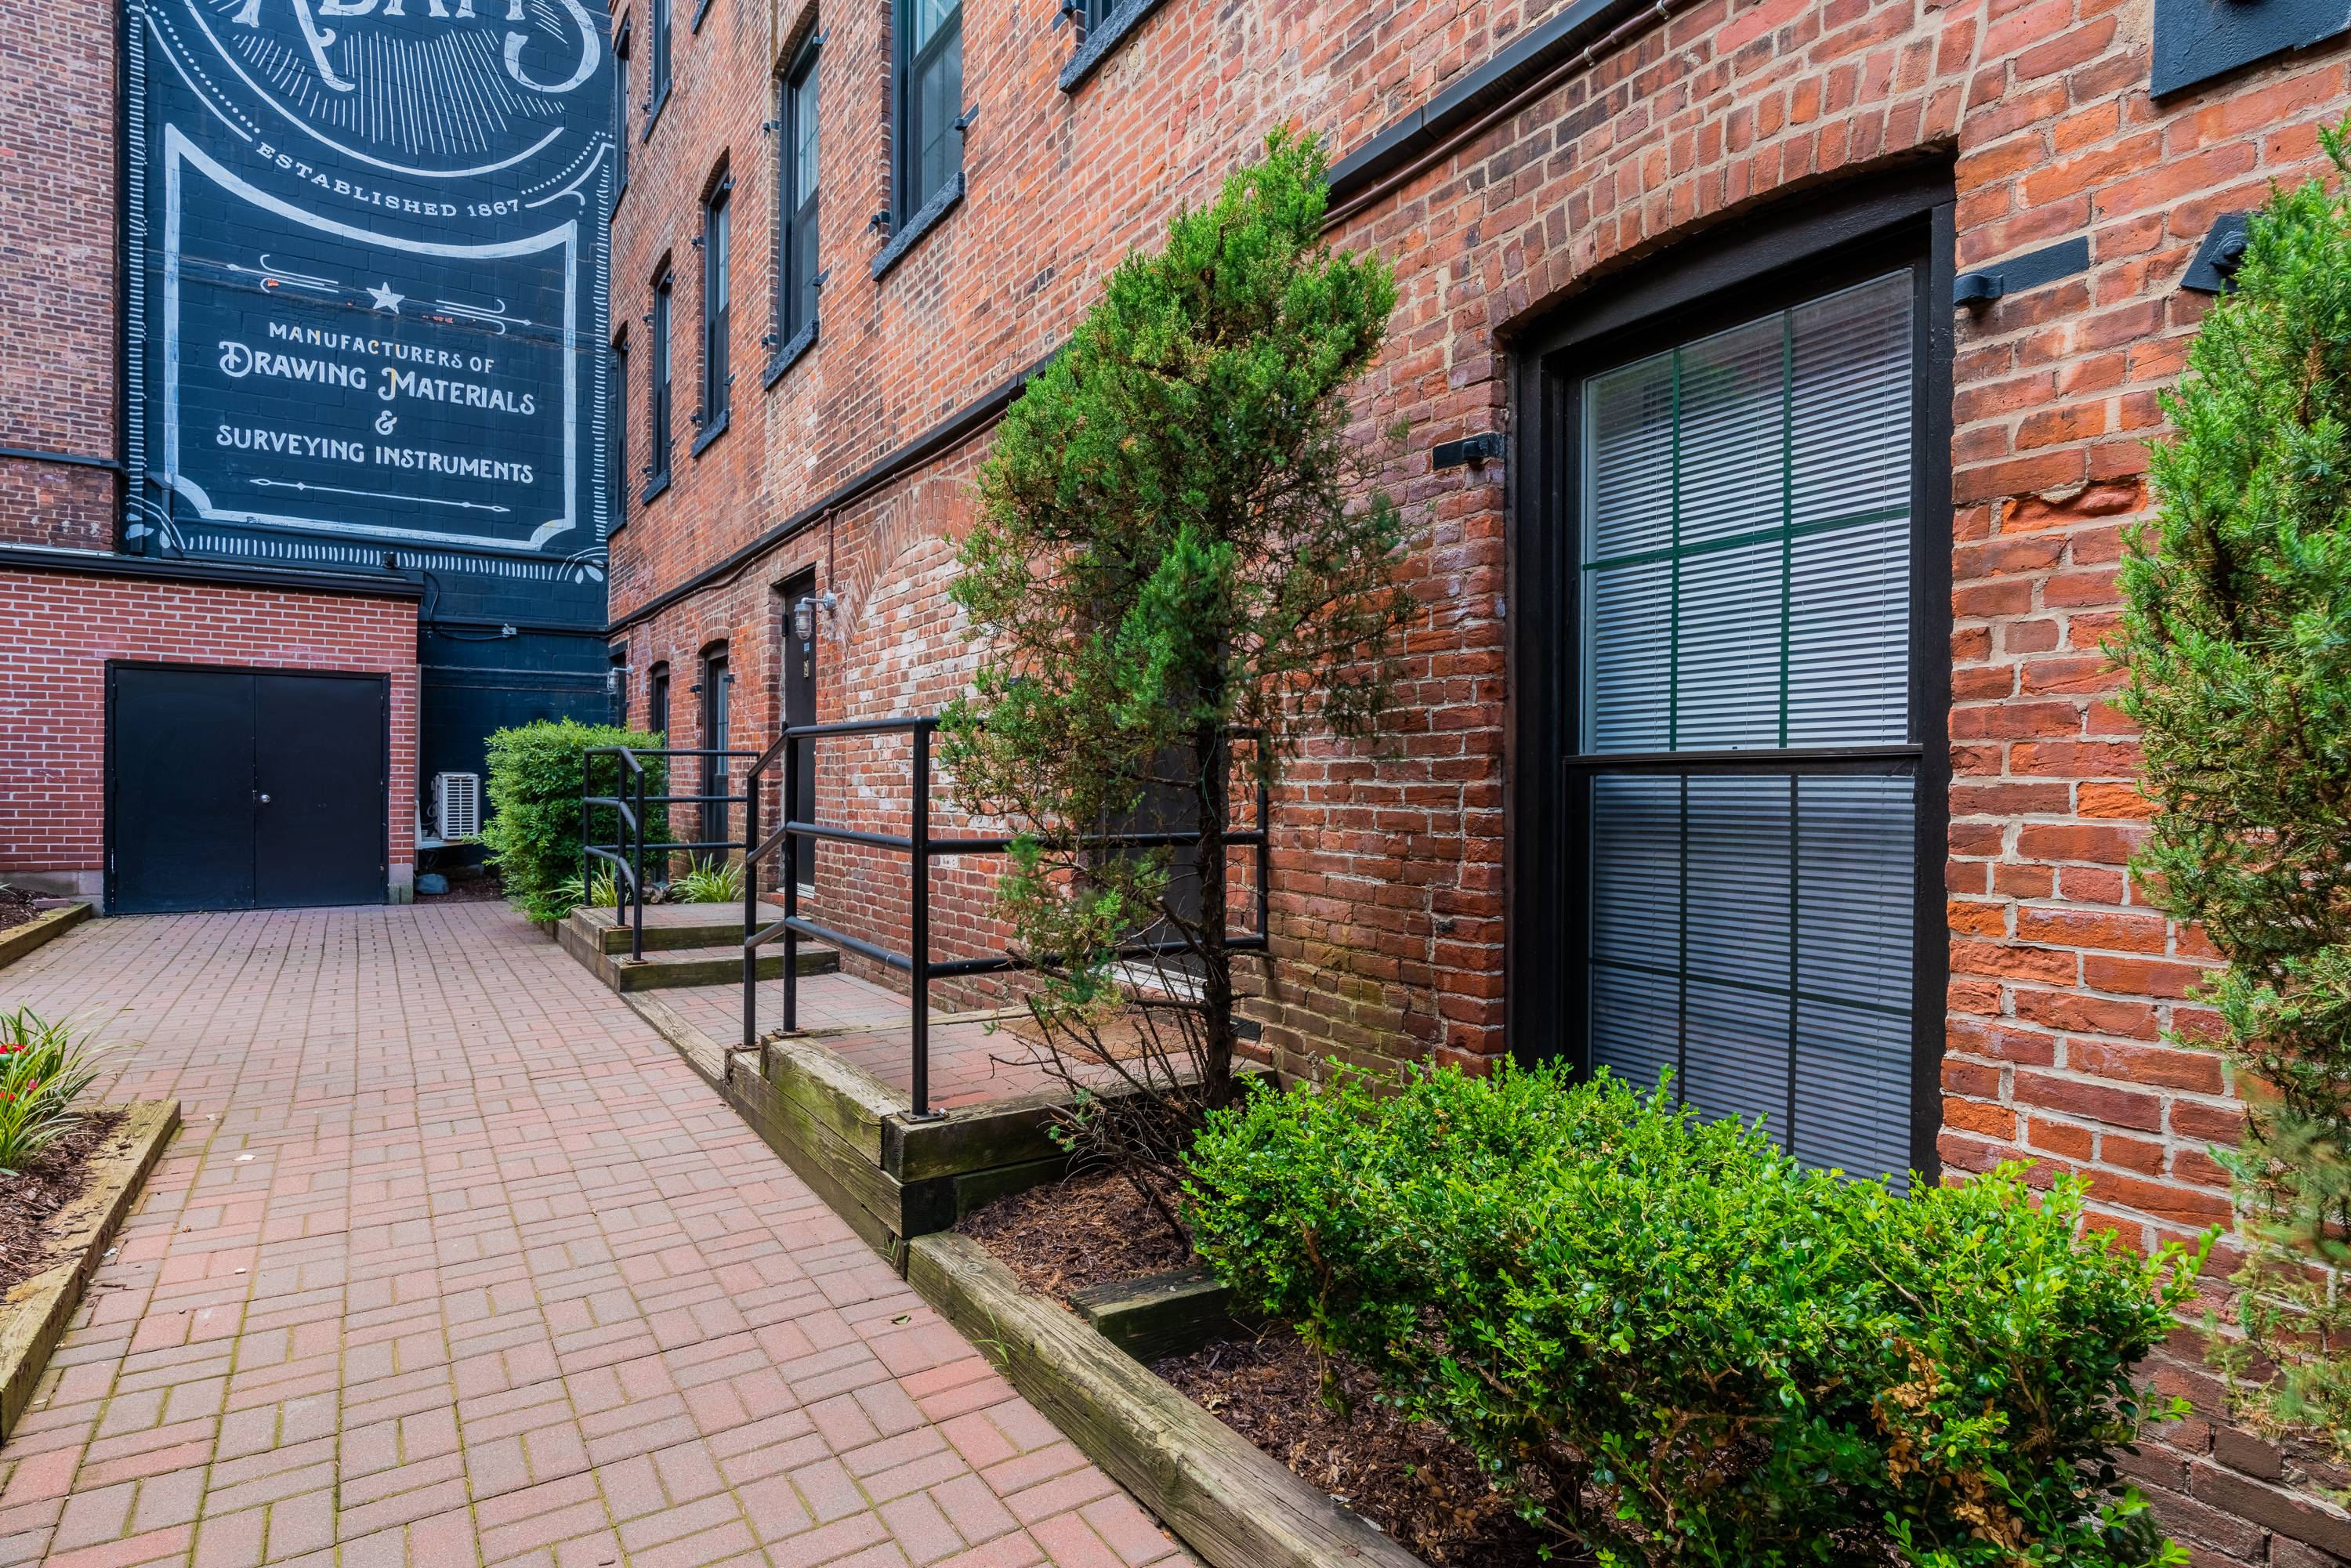 One of a Kind 2 Bedroom 1.5 Bath Soho-Loft Style Home W/ Office Space in Downtown Hoboken!  Washer/Dryer In Unit.  Minutes to the Hoboken  Path Train and Bus Lines! Onsite Parking!  Pet Friendly!